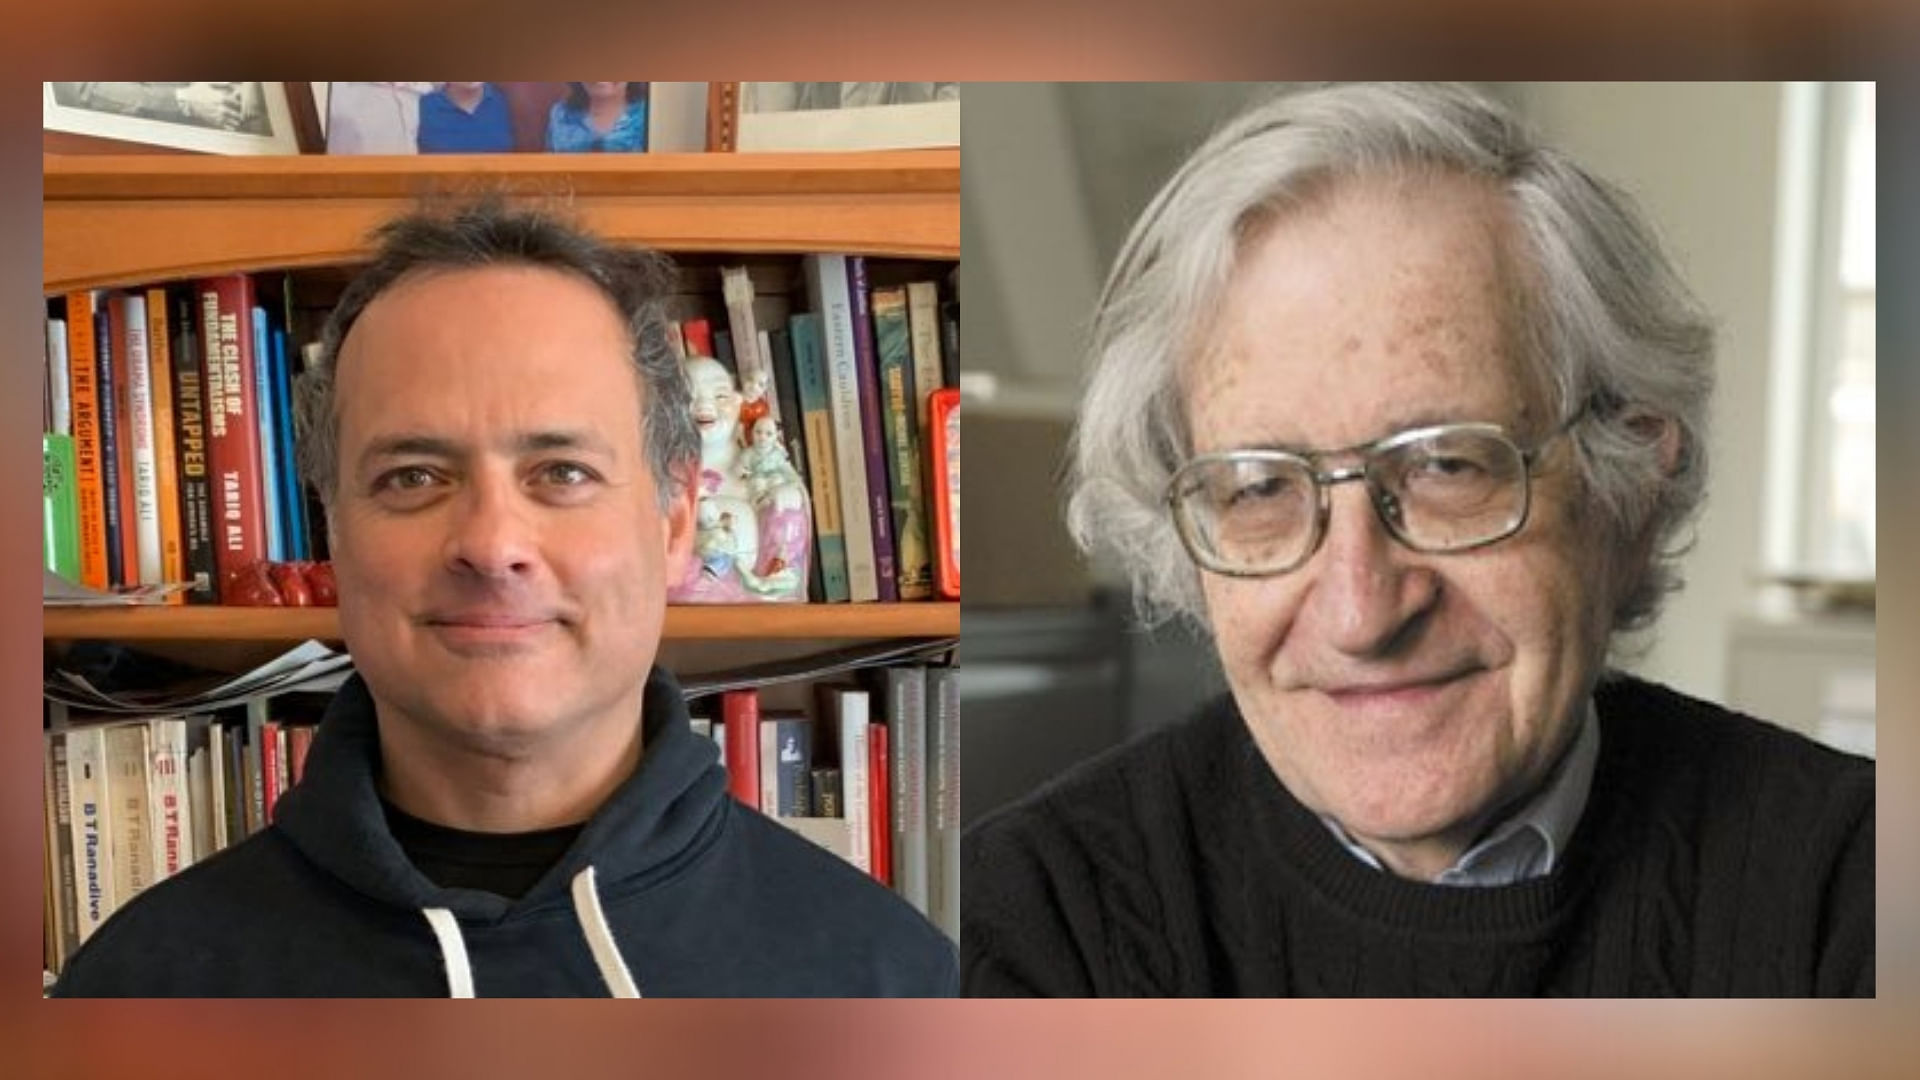 A dialogue with Noam Chomsky and Vijay Prashad at the Mumbai (Tata) Lit Fest has been cancelled<a href="https://www.routledge.com/Internationalism-or-Extinction/Chomsky-Derber-Moodliar-Shannon/p/book/9780367430580">.</a>